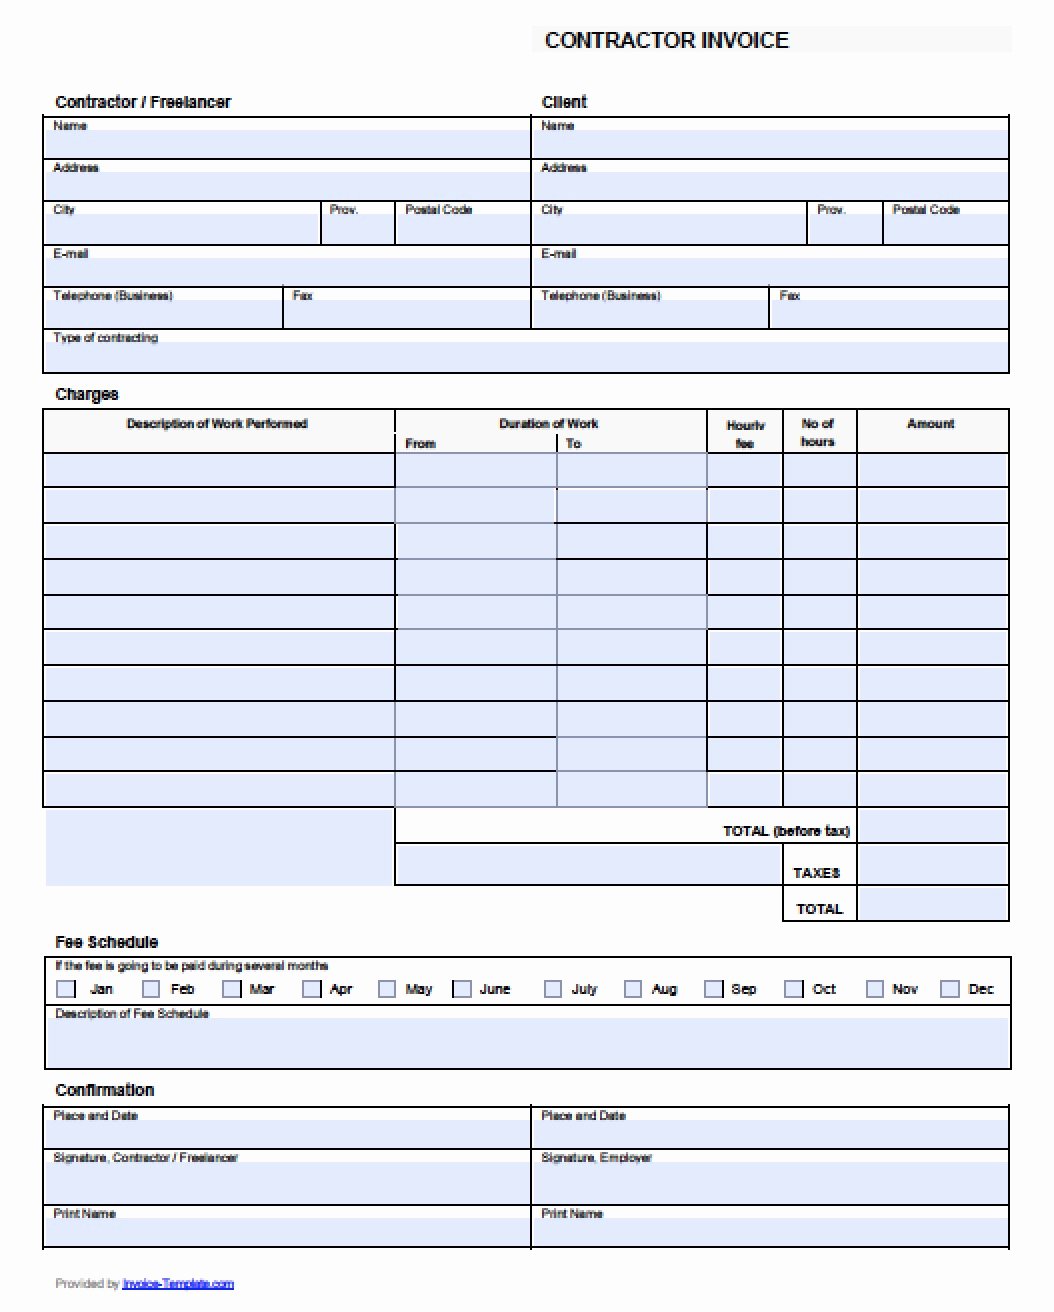 Timesheet Invoice Template Excel Inspirational Excel Spreadsheet Invoice Template Excel Spreadsheet